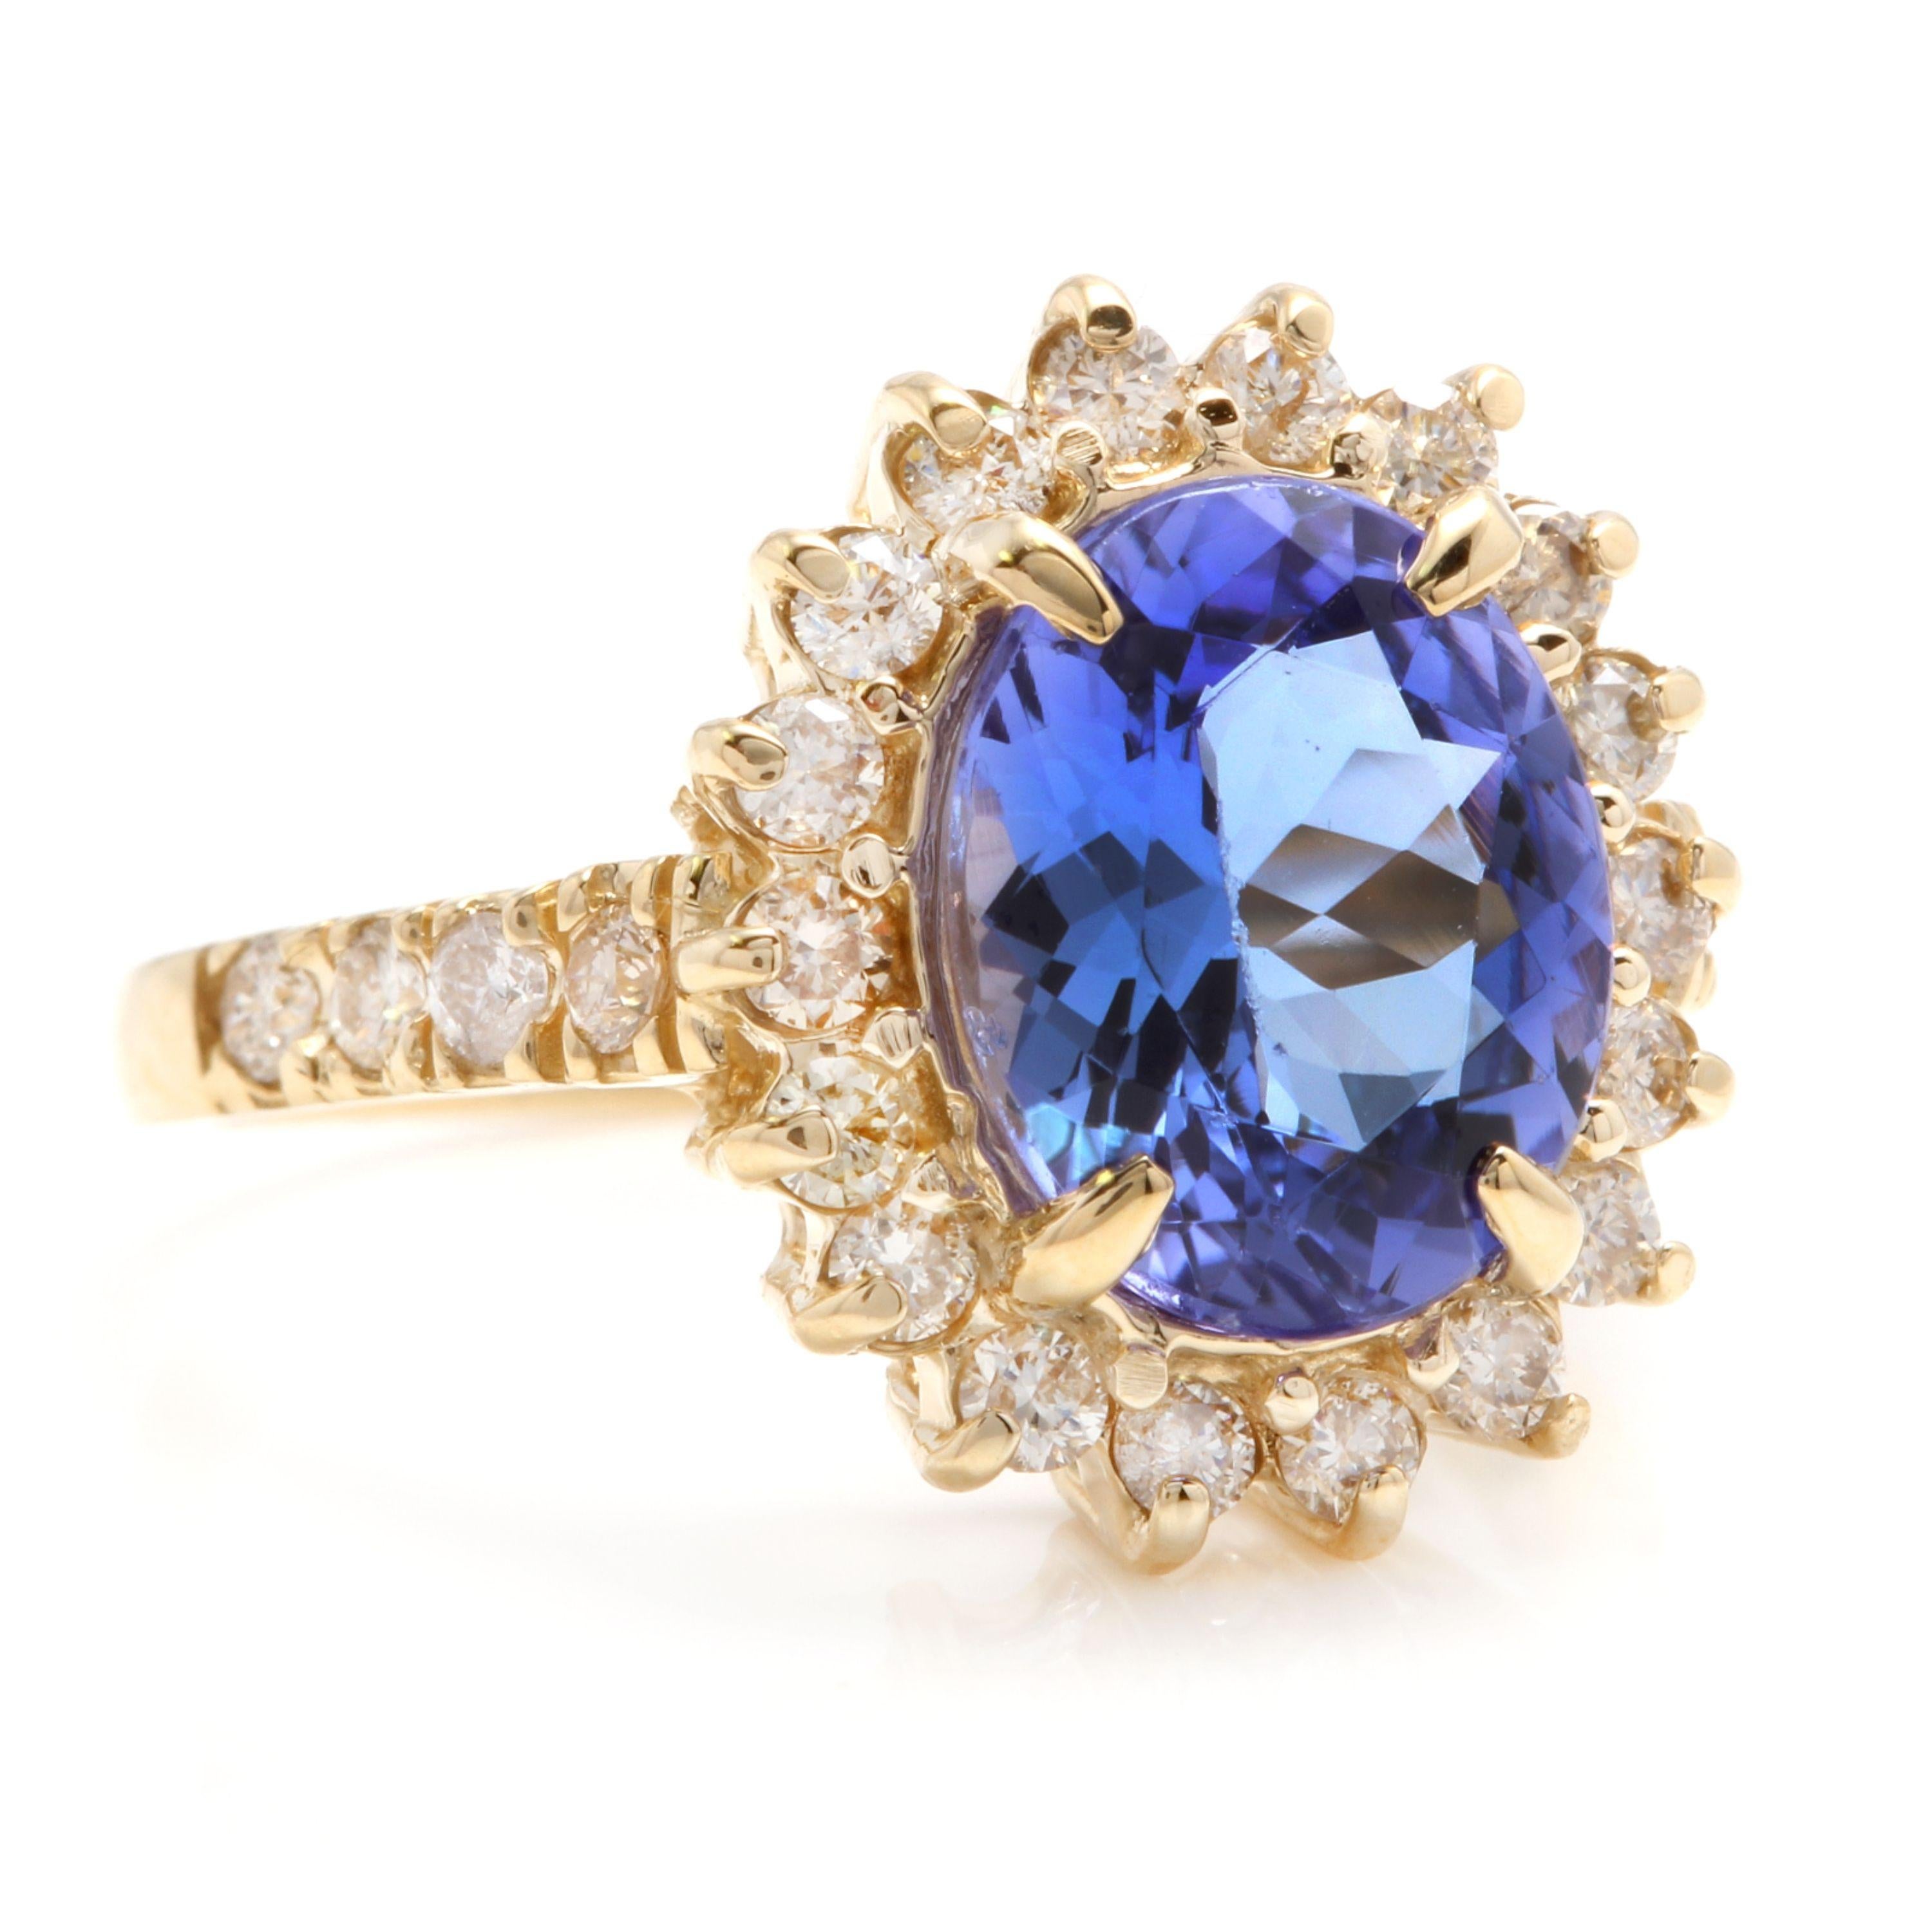 3.80 Carats Natural Very Nice Looking Tanzanite and Diamond 14K Solid Yellow Gold Ring

Total Natural Oval Cut Tanzanite Weight is: Approx. 3.00 Carats

Tanzanite Measures: Approx. 10.00 x 8.00mm

Natural Round Diamonds Weight: Approx. 0.80 Carats